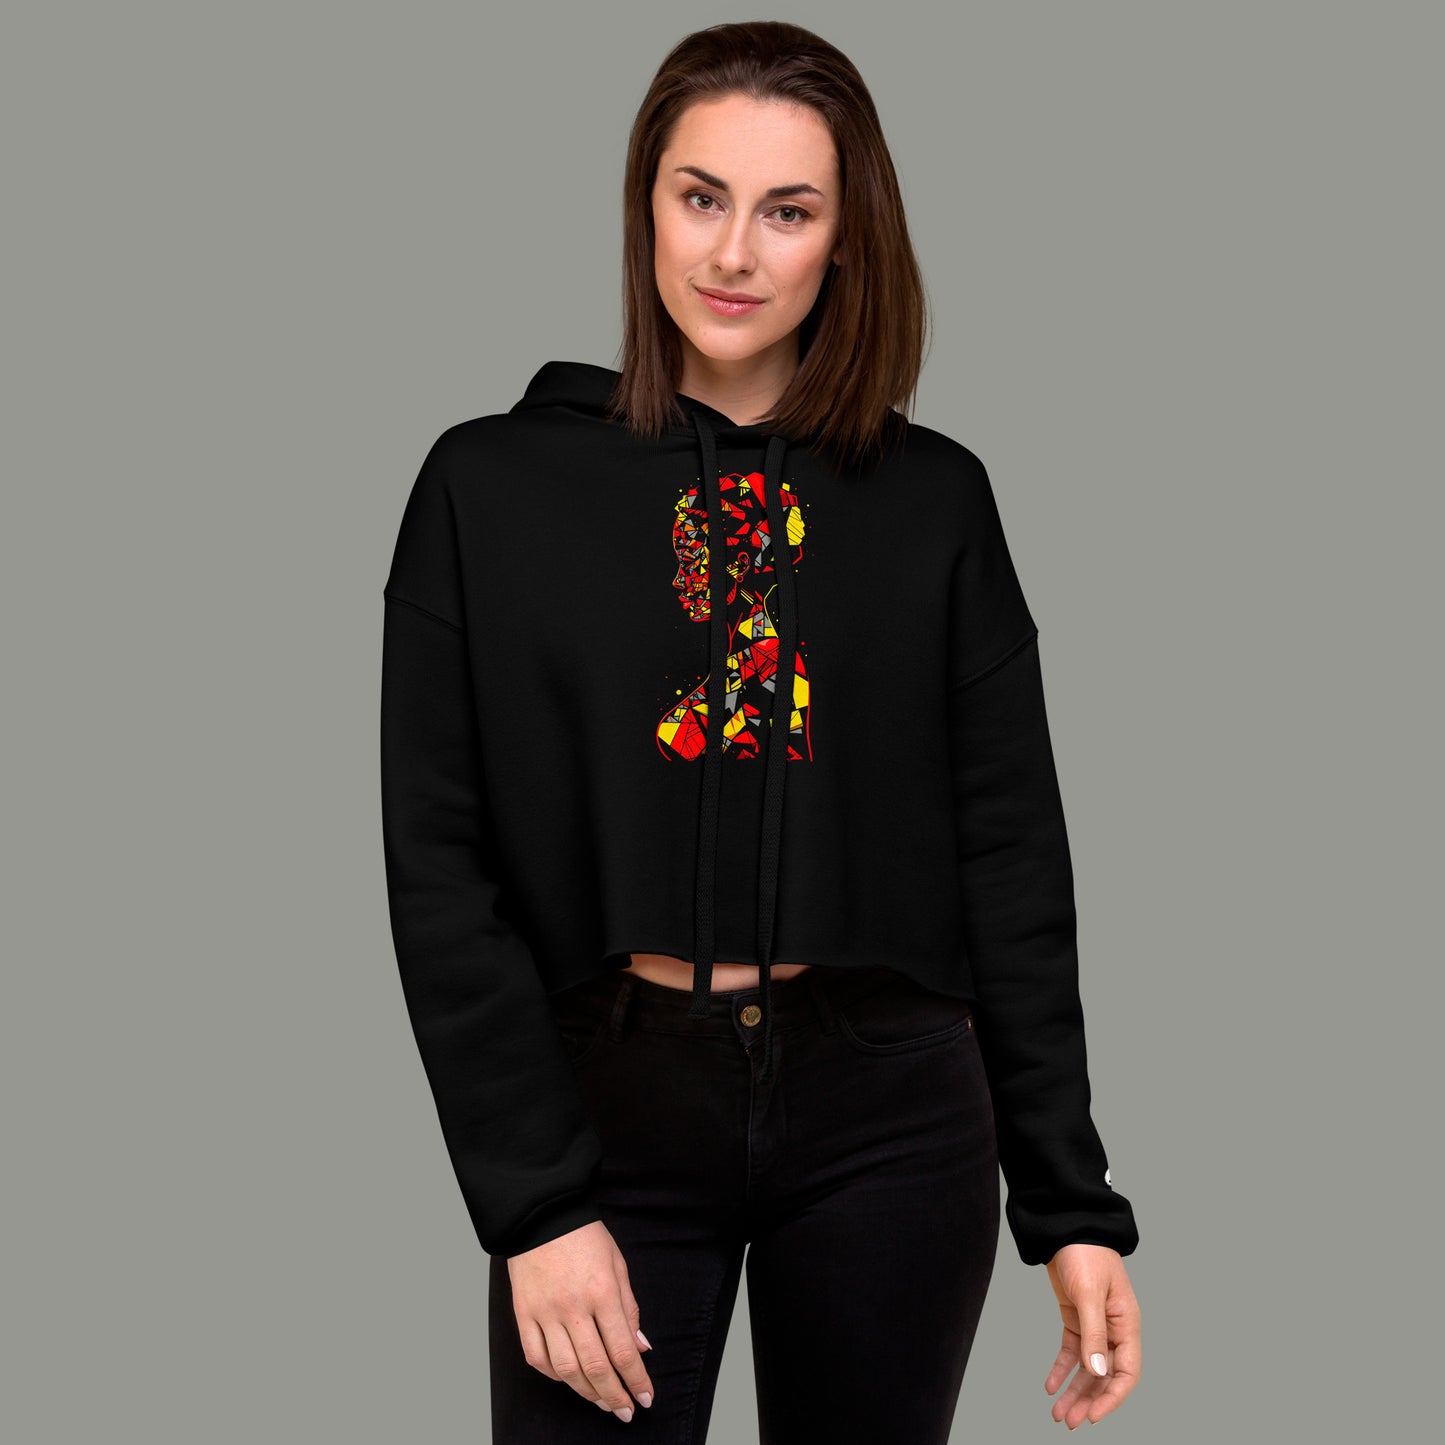 Facets of Femininity Women's Cropped Hoodie